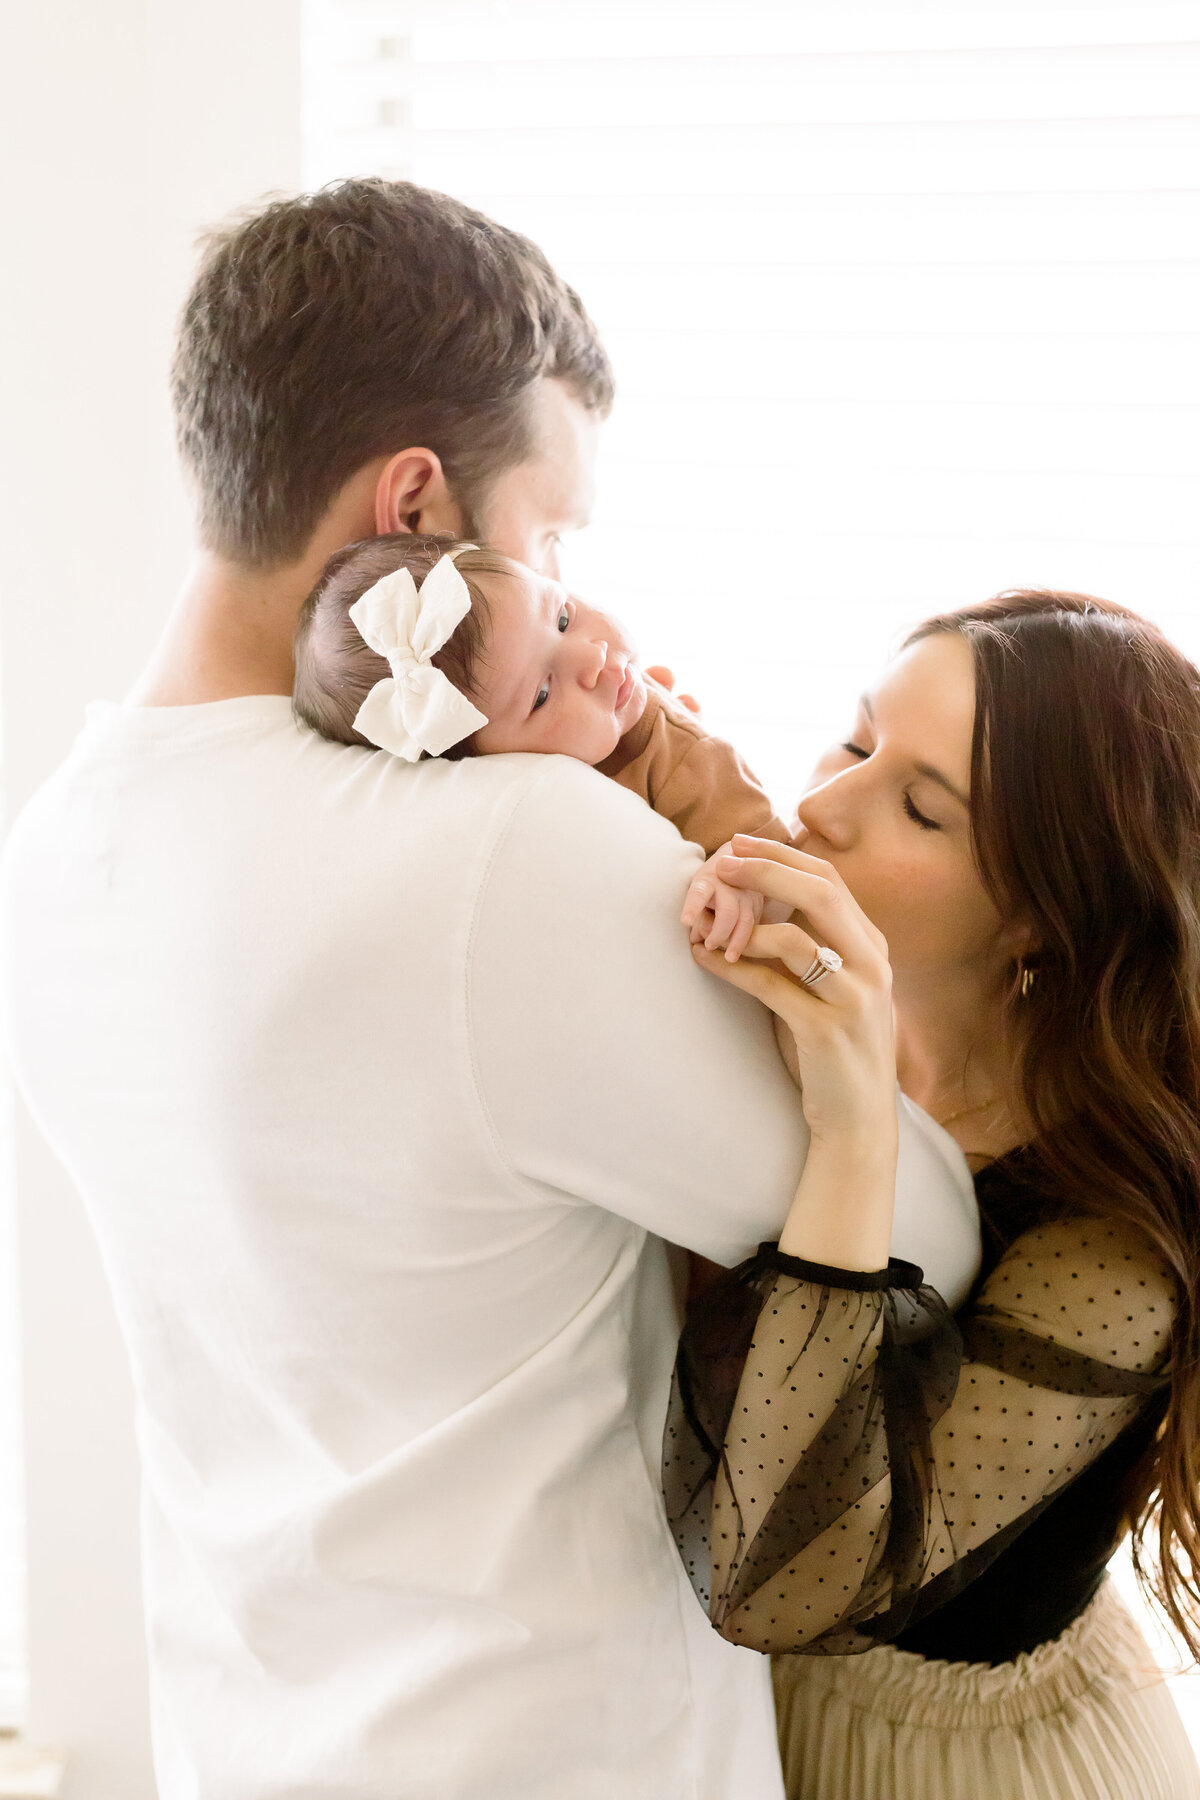 denton newborn photographer serving families all over the north dfw area